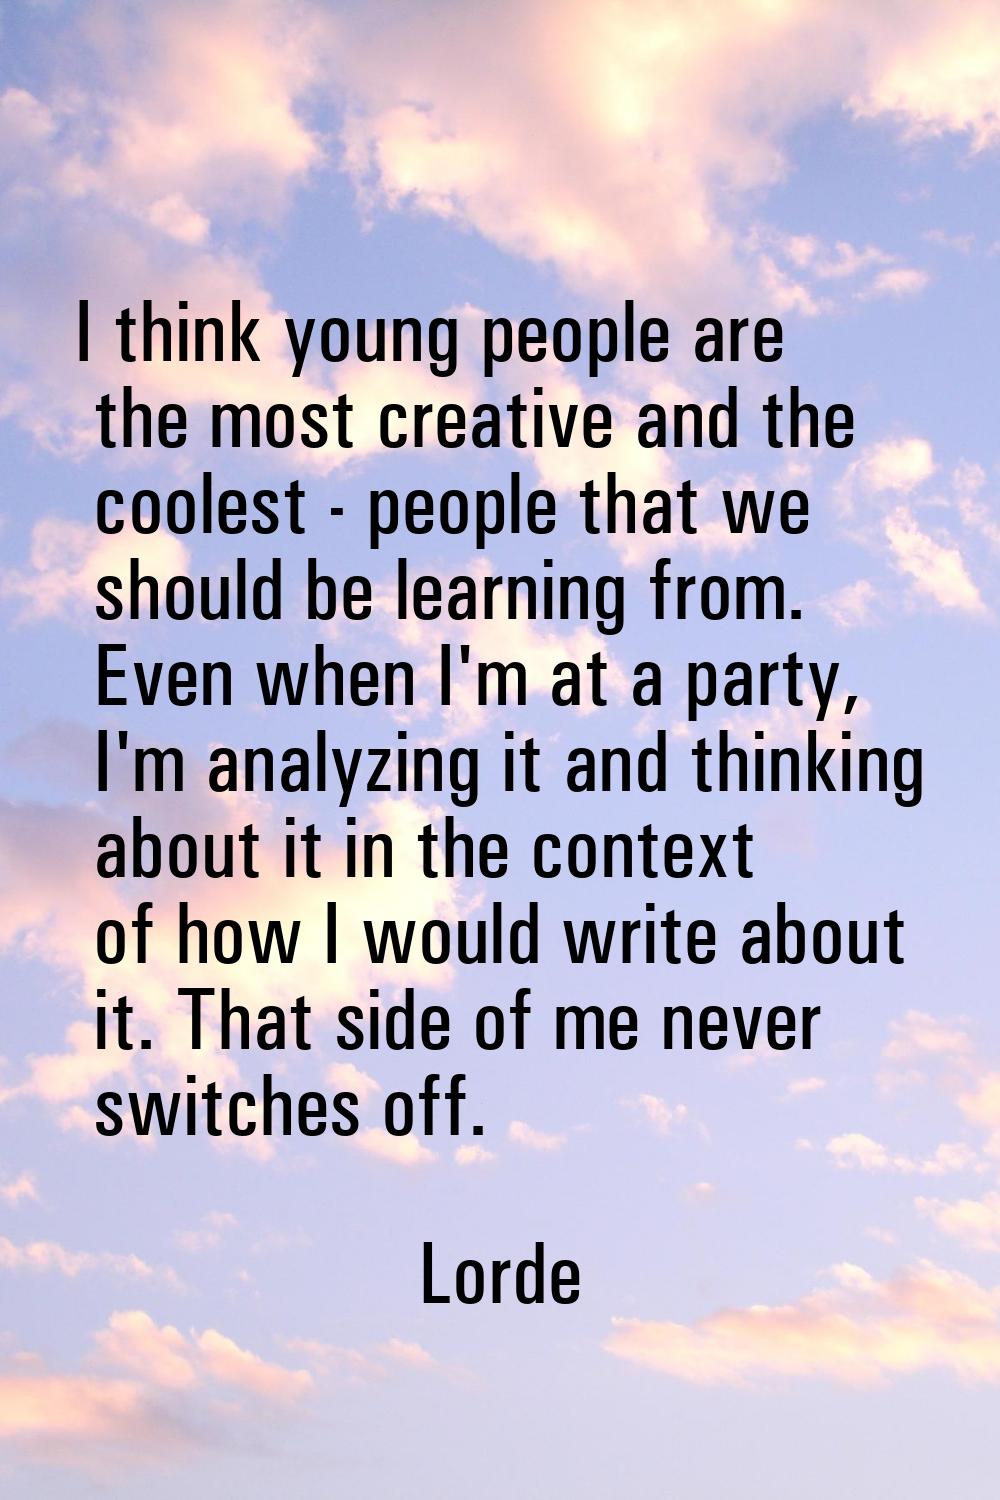 I think young people are the most creative and the coolest - people that we should be learning from